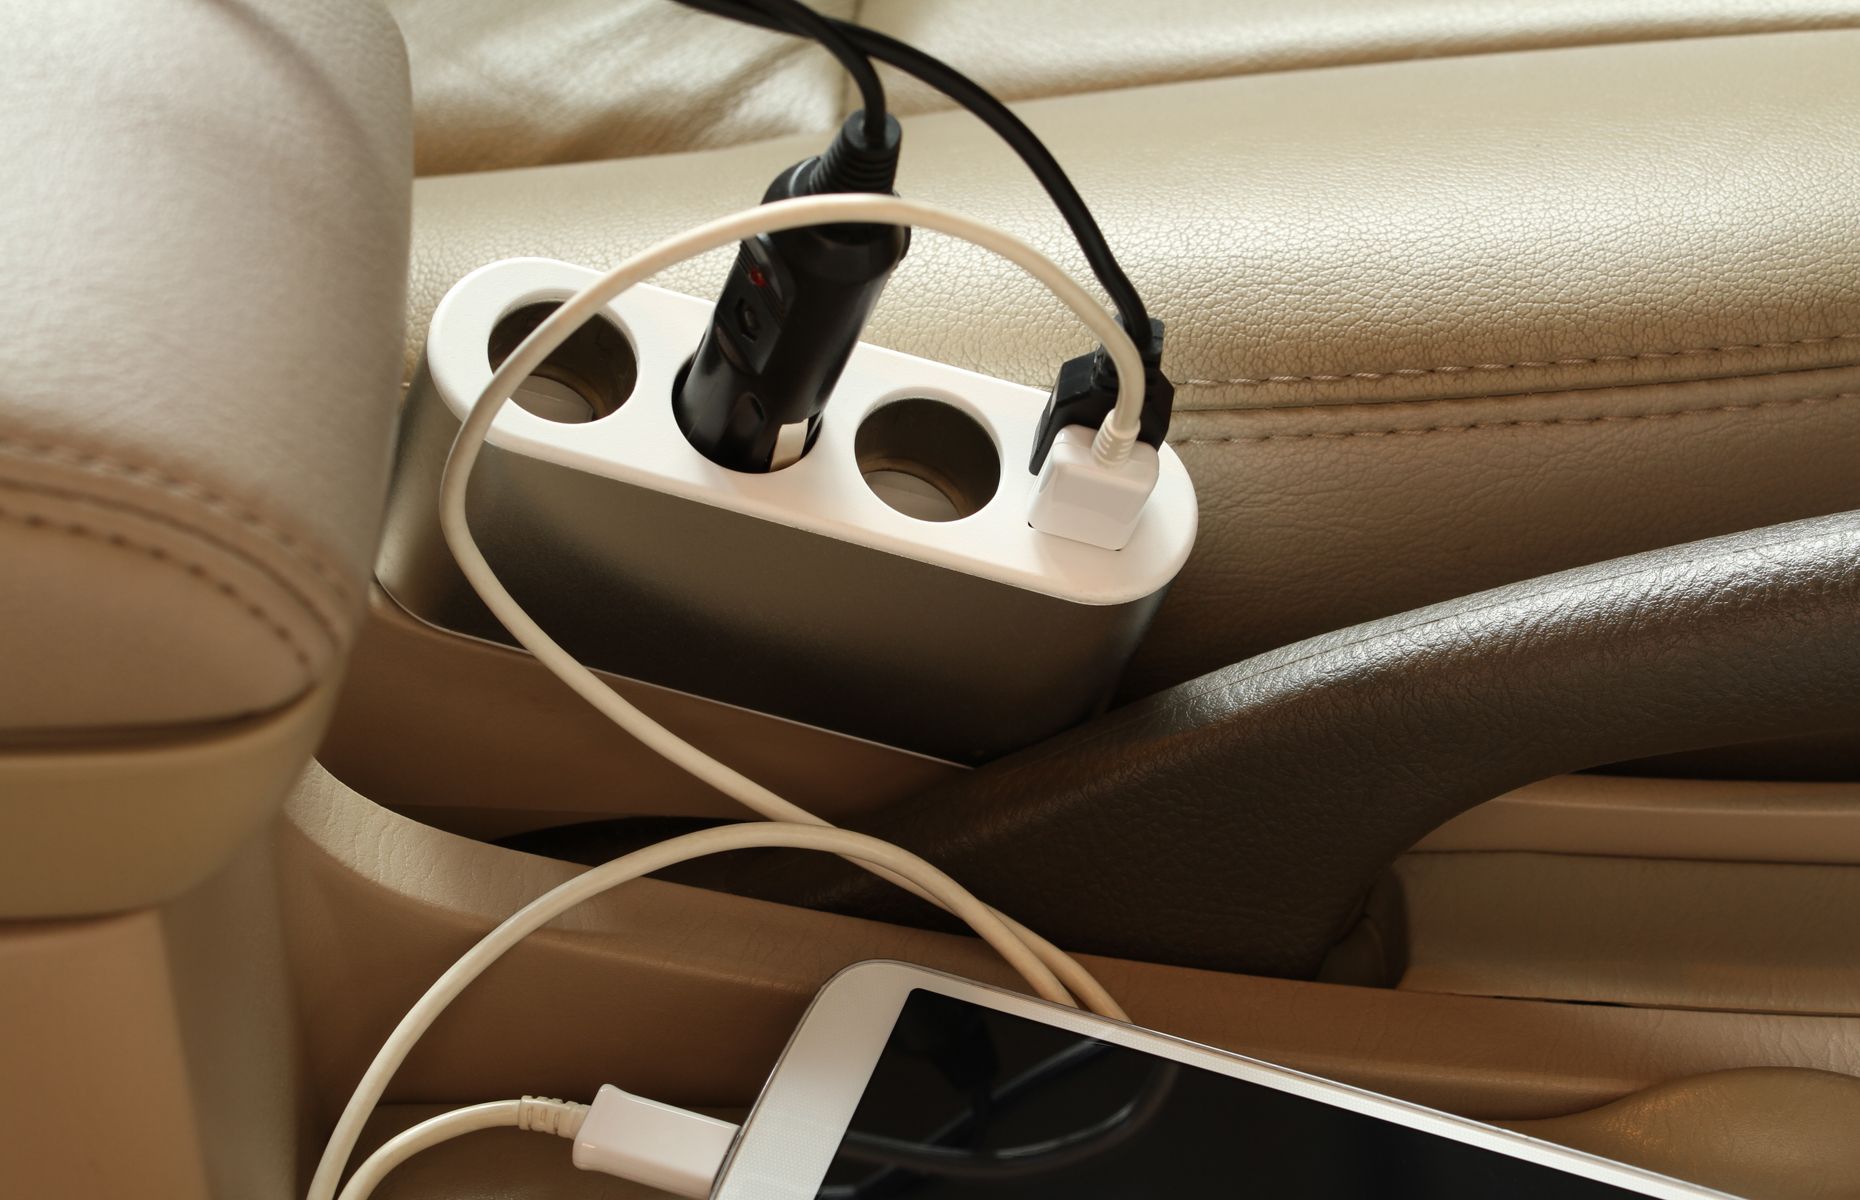 Check out these 8 accessories you can plug into your car's